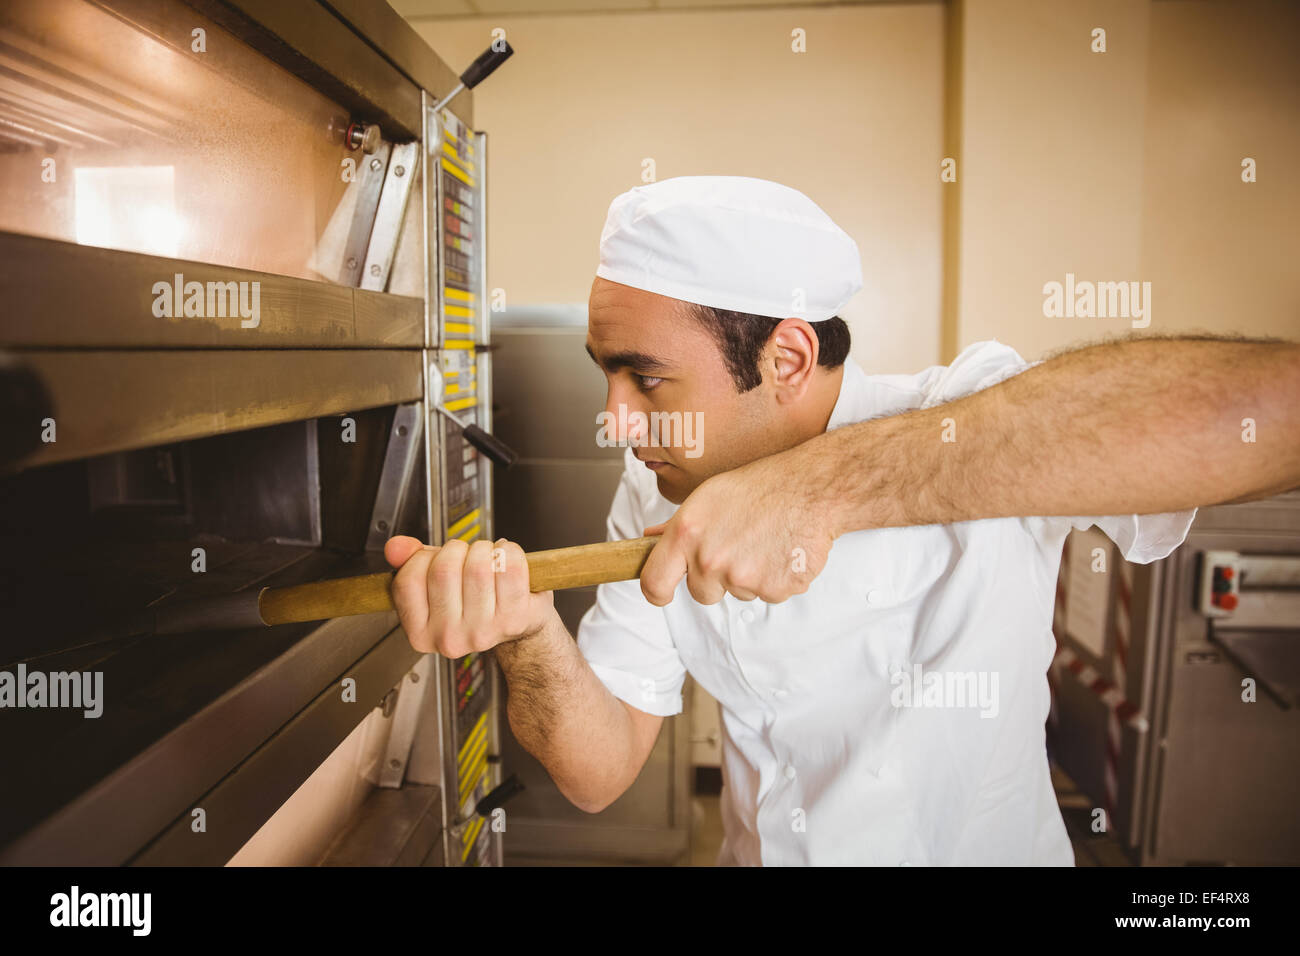 Baker taking bread out of oven Stock Photo